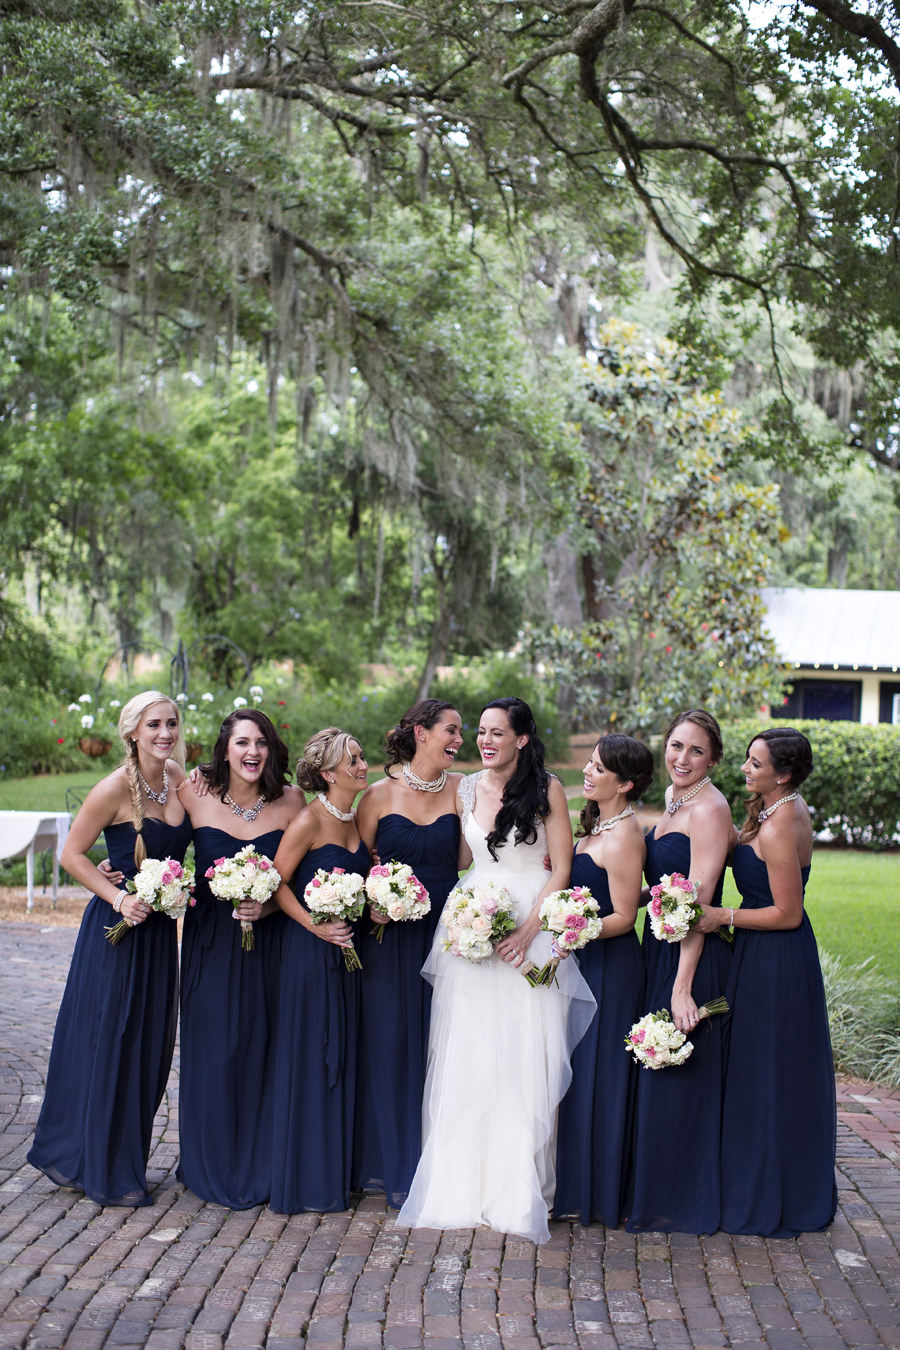 Outdoor Bridal Party Portrait with Ivory Ballgown and Navy Blue Bridesmaid Dresses with Ivory and Pink Bouquets | Tampa Bay Wedding Photographer Djamel Photography